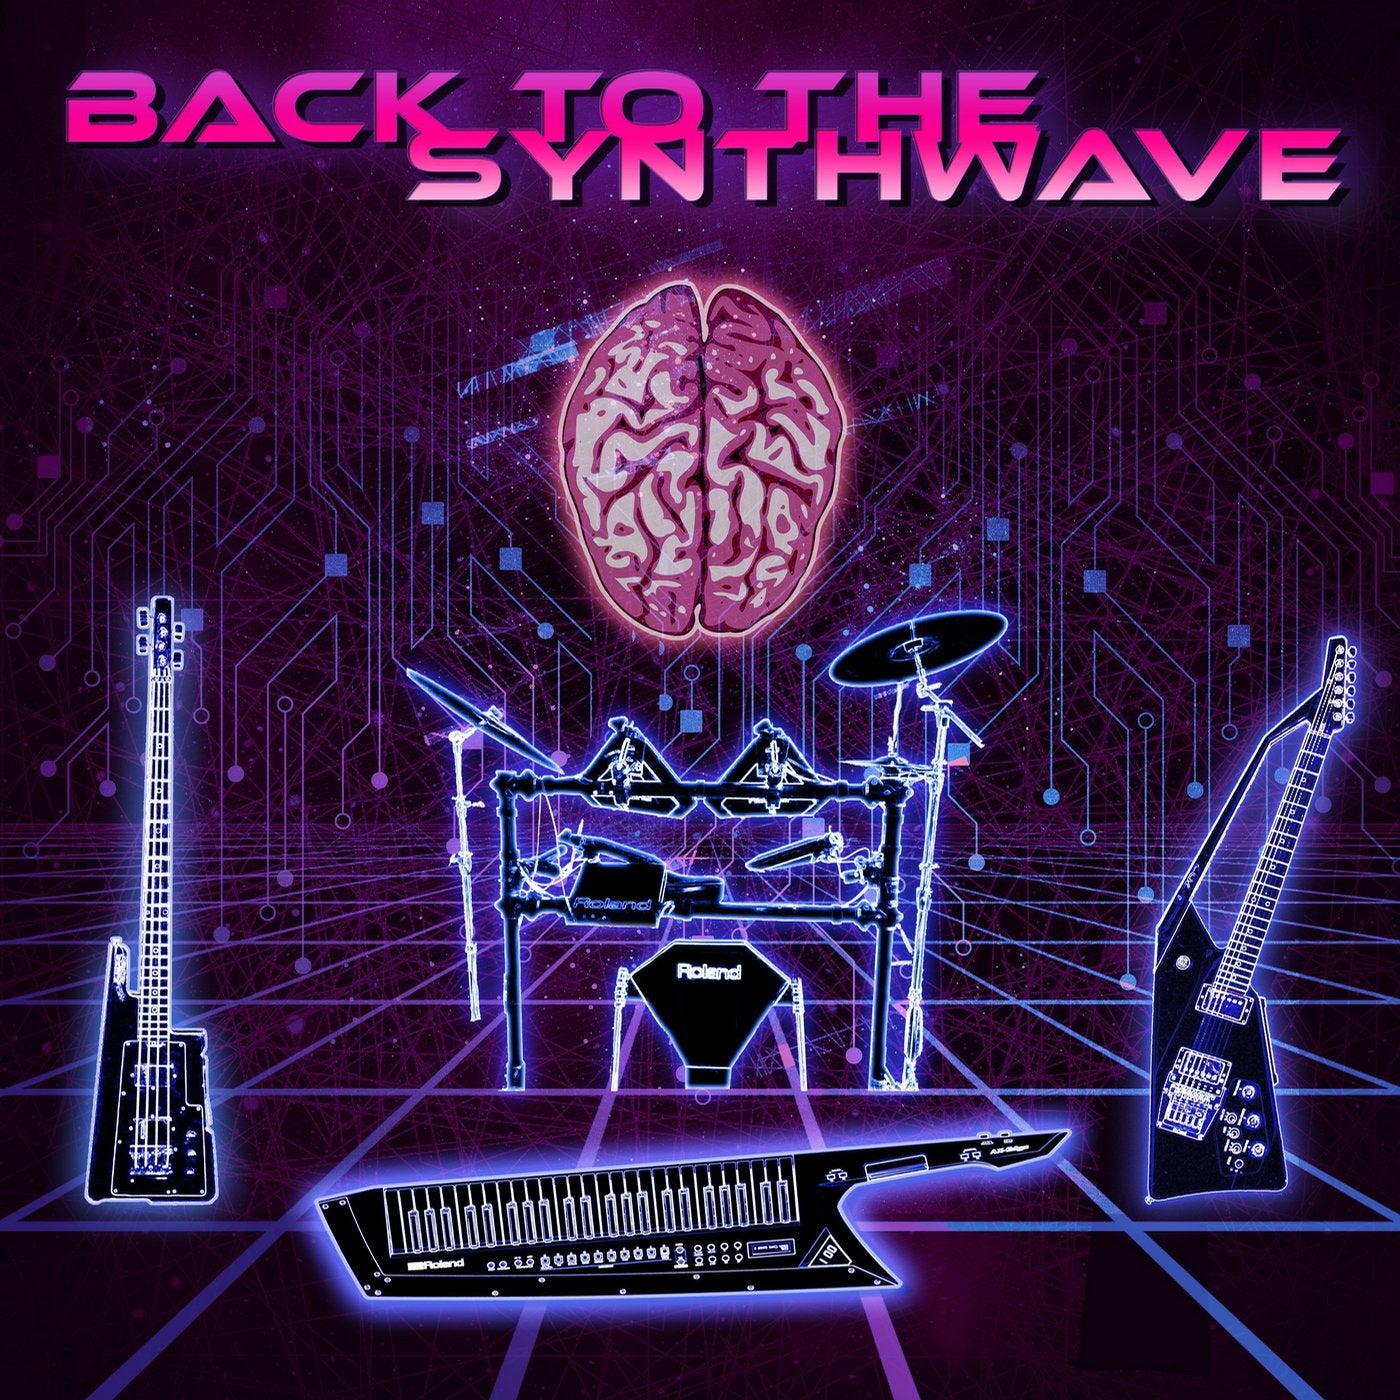 Back to the Synthwave